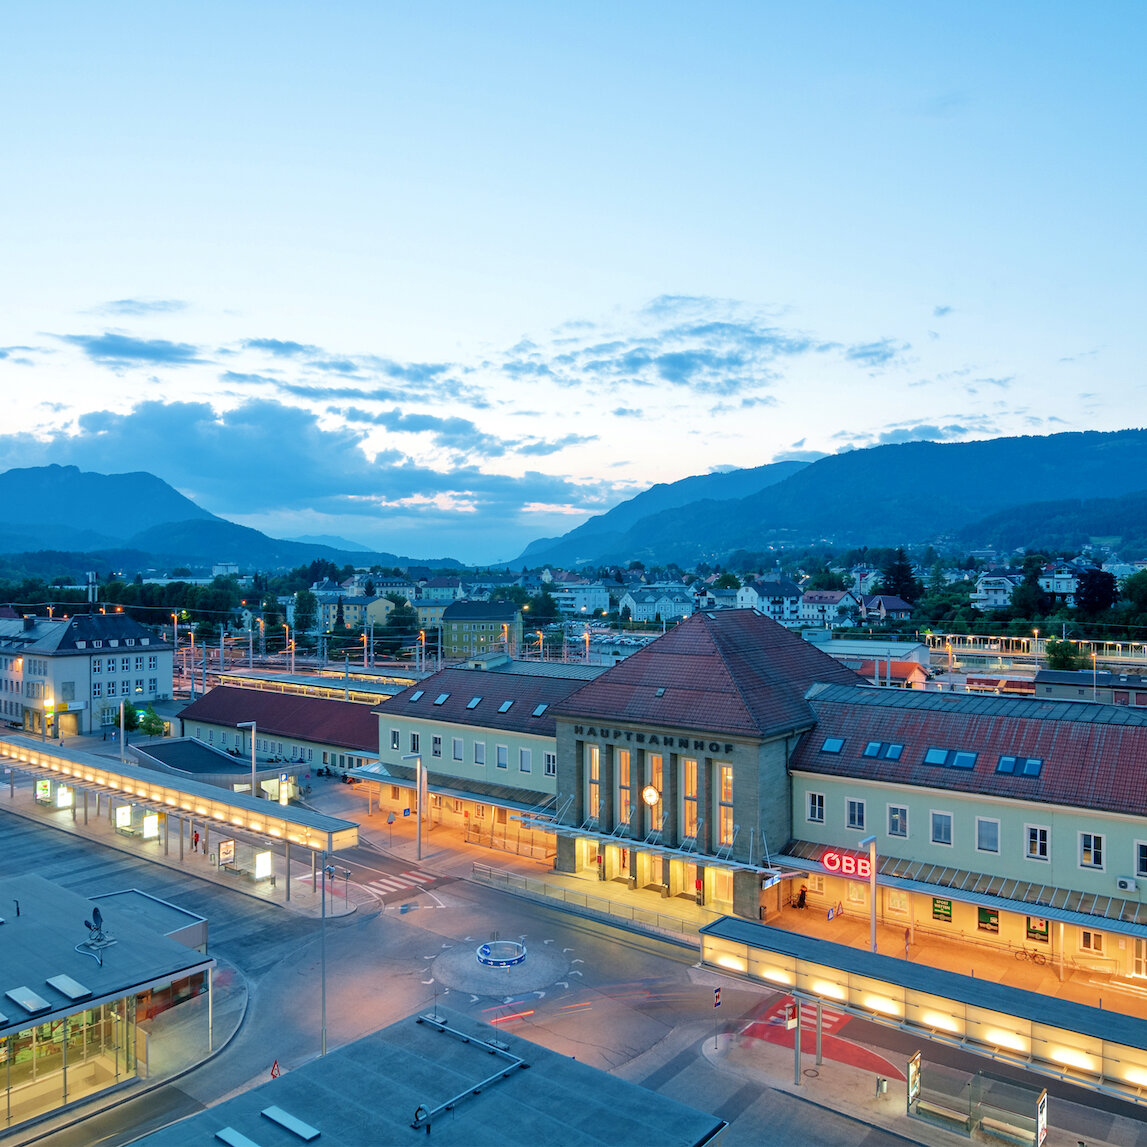 Central station in Villach